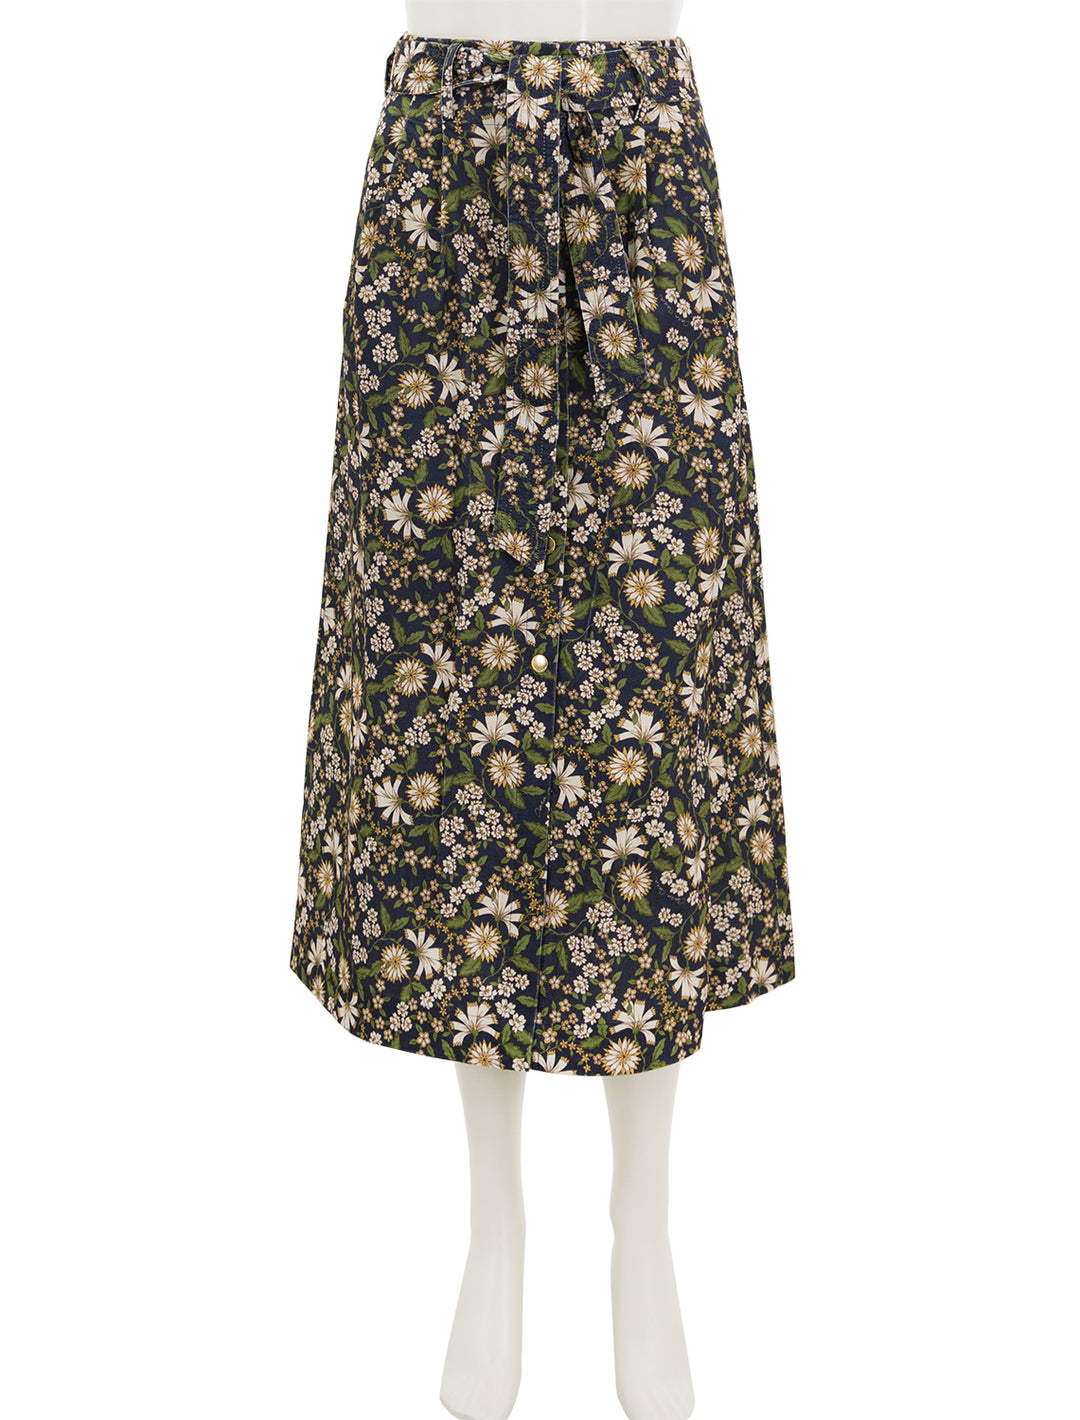 Front view of Cara Cara's oslo skirt in millerfluer evening blue.